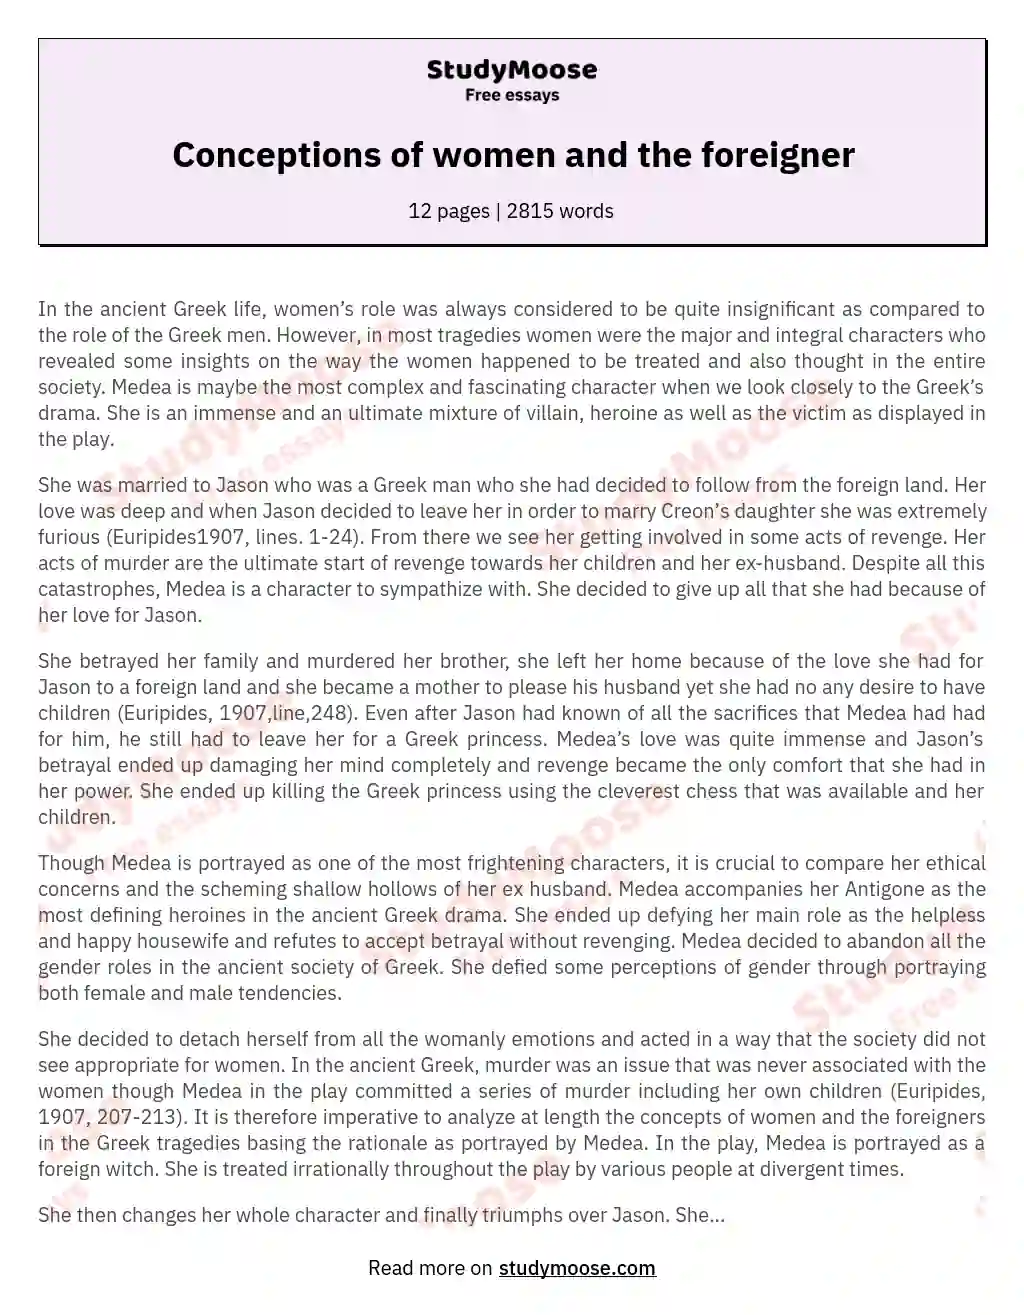 Conceptions of women and the foreigner essay